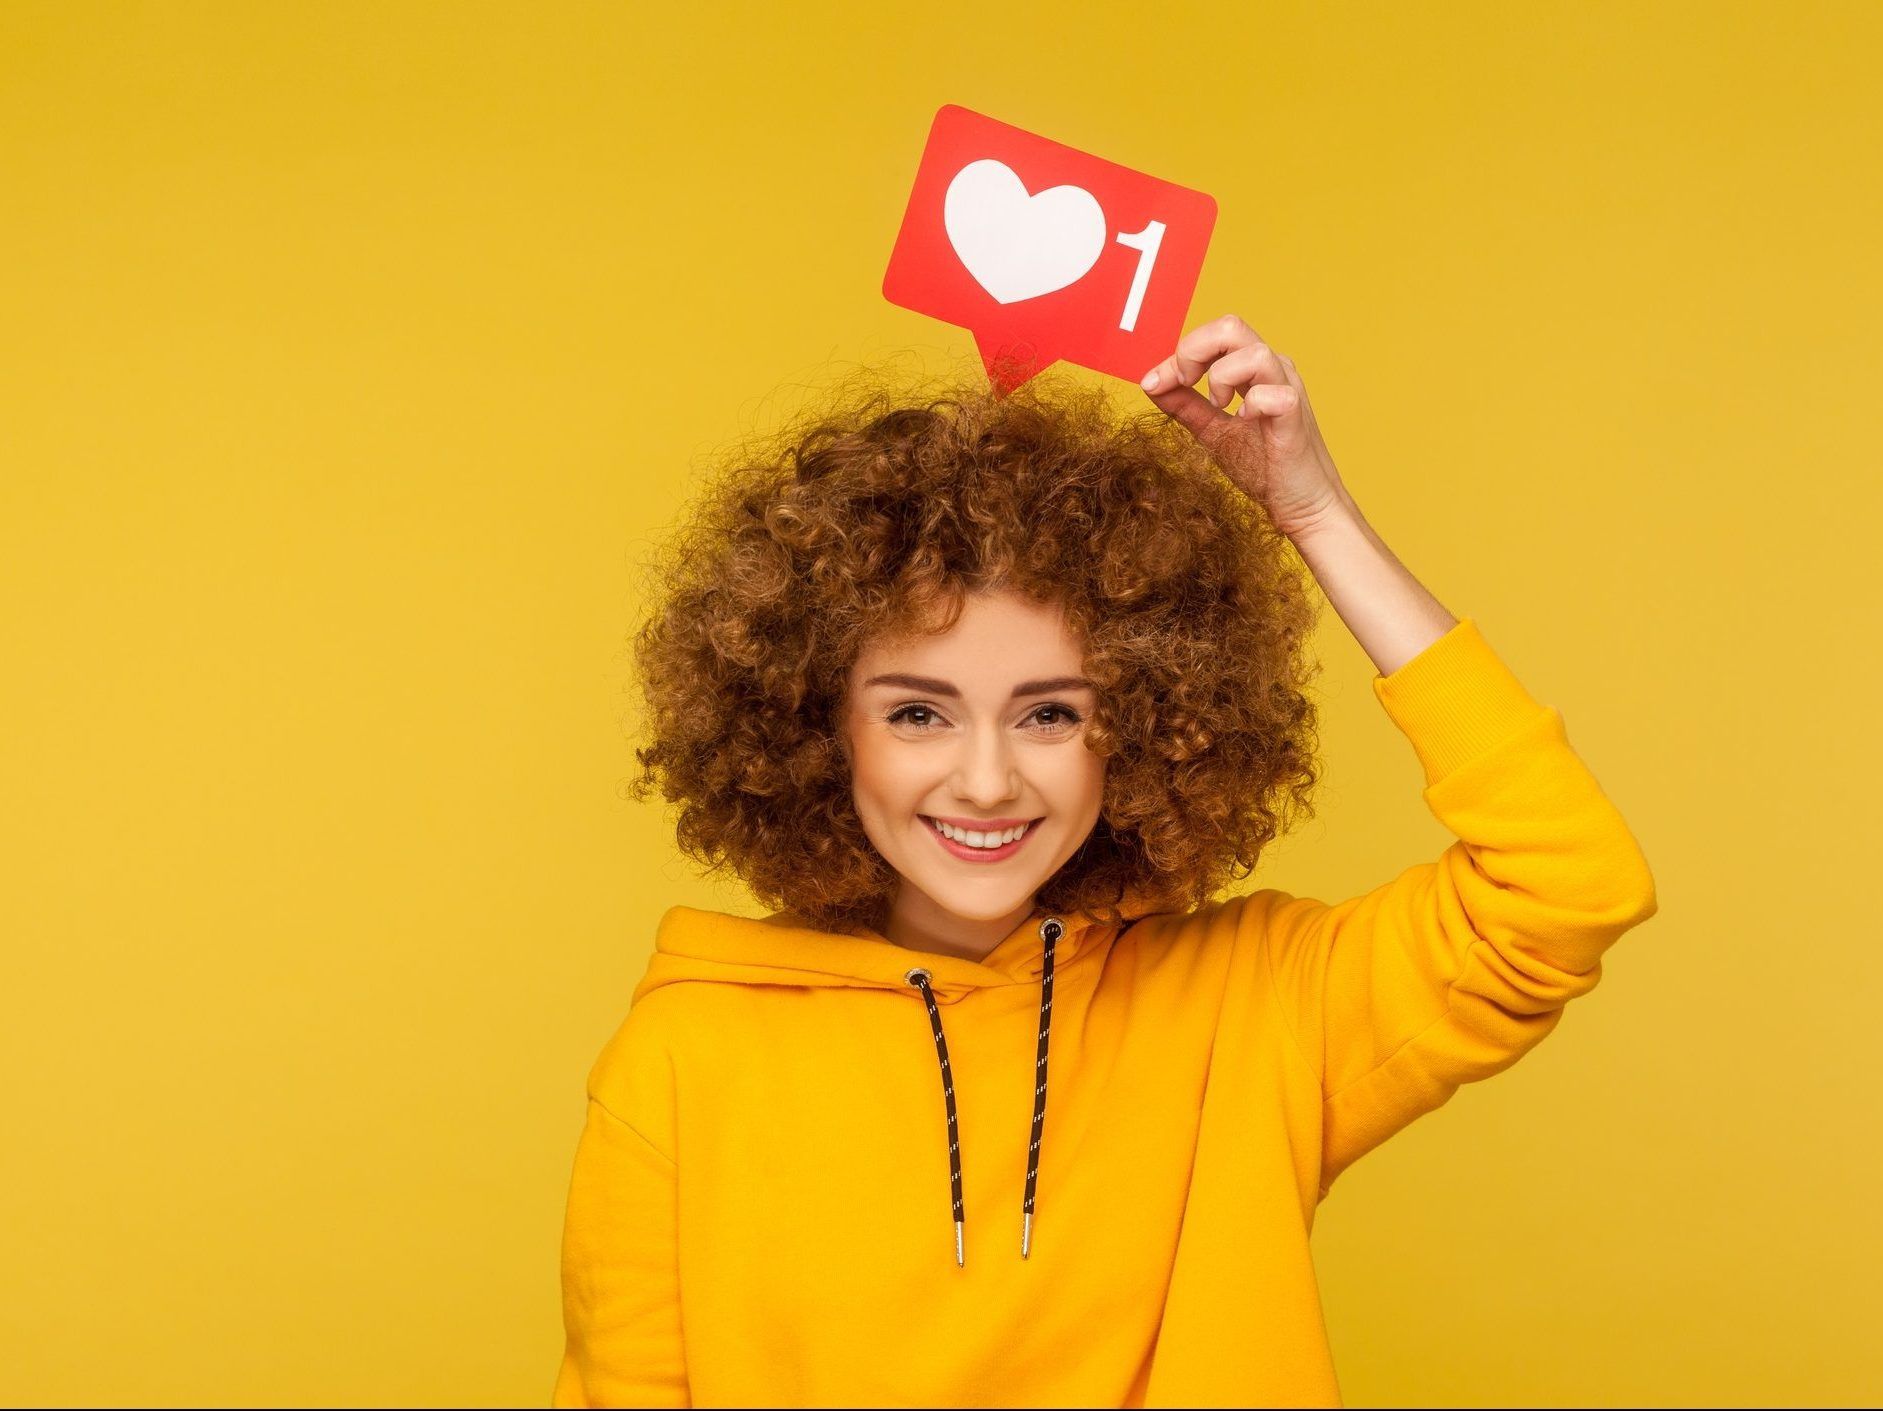 Internet blogging. Portrait of happy smiling curly-haired young woman in urban style hoodie holding heart like icon